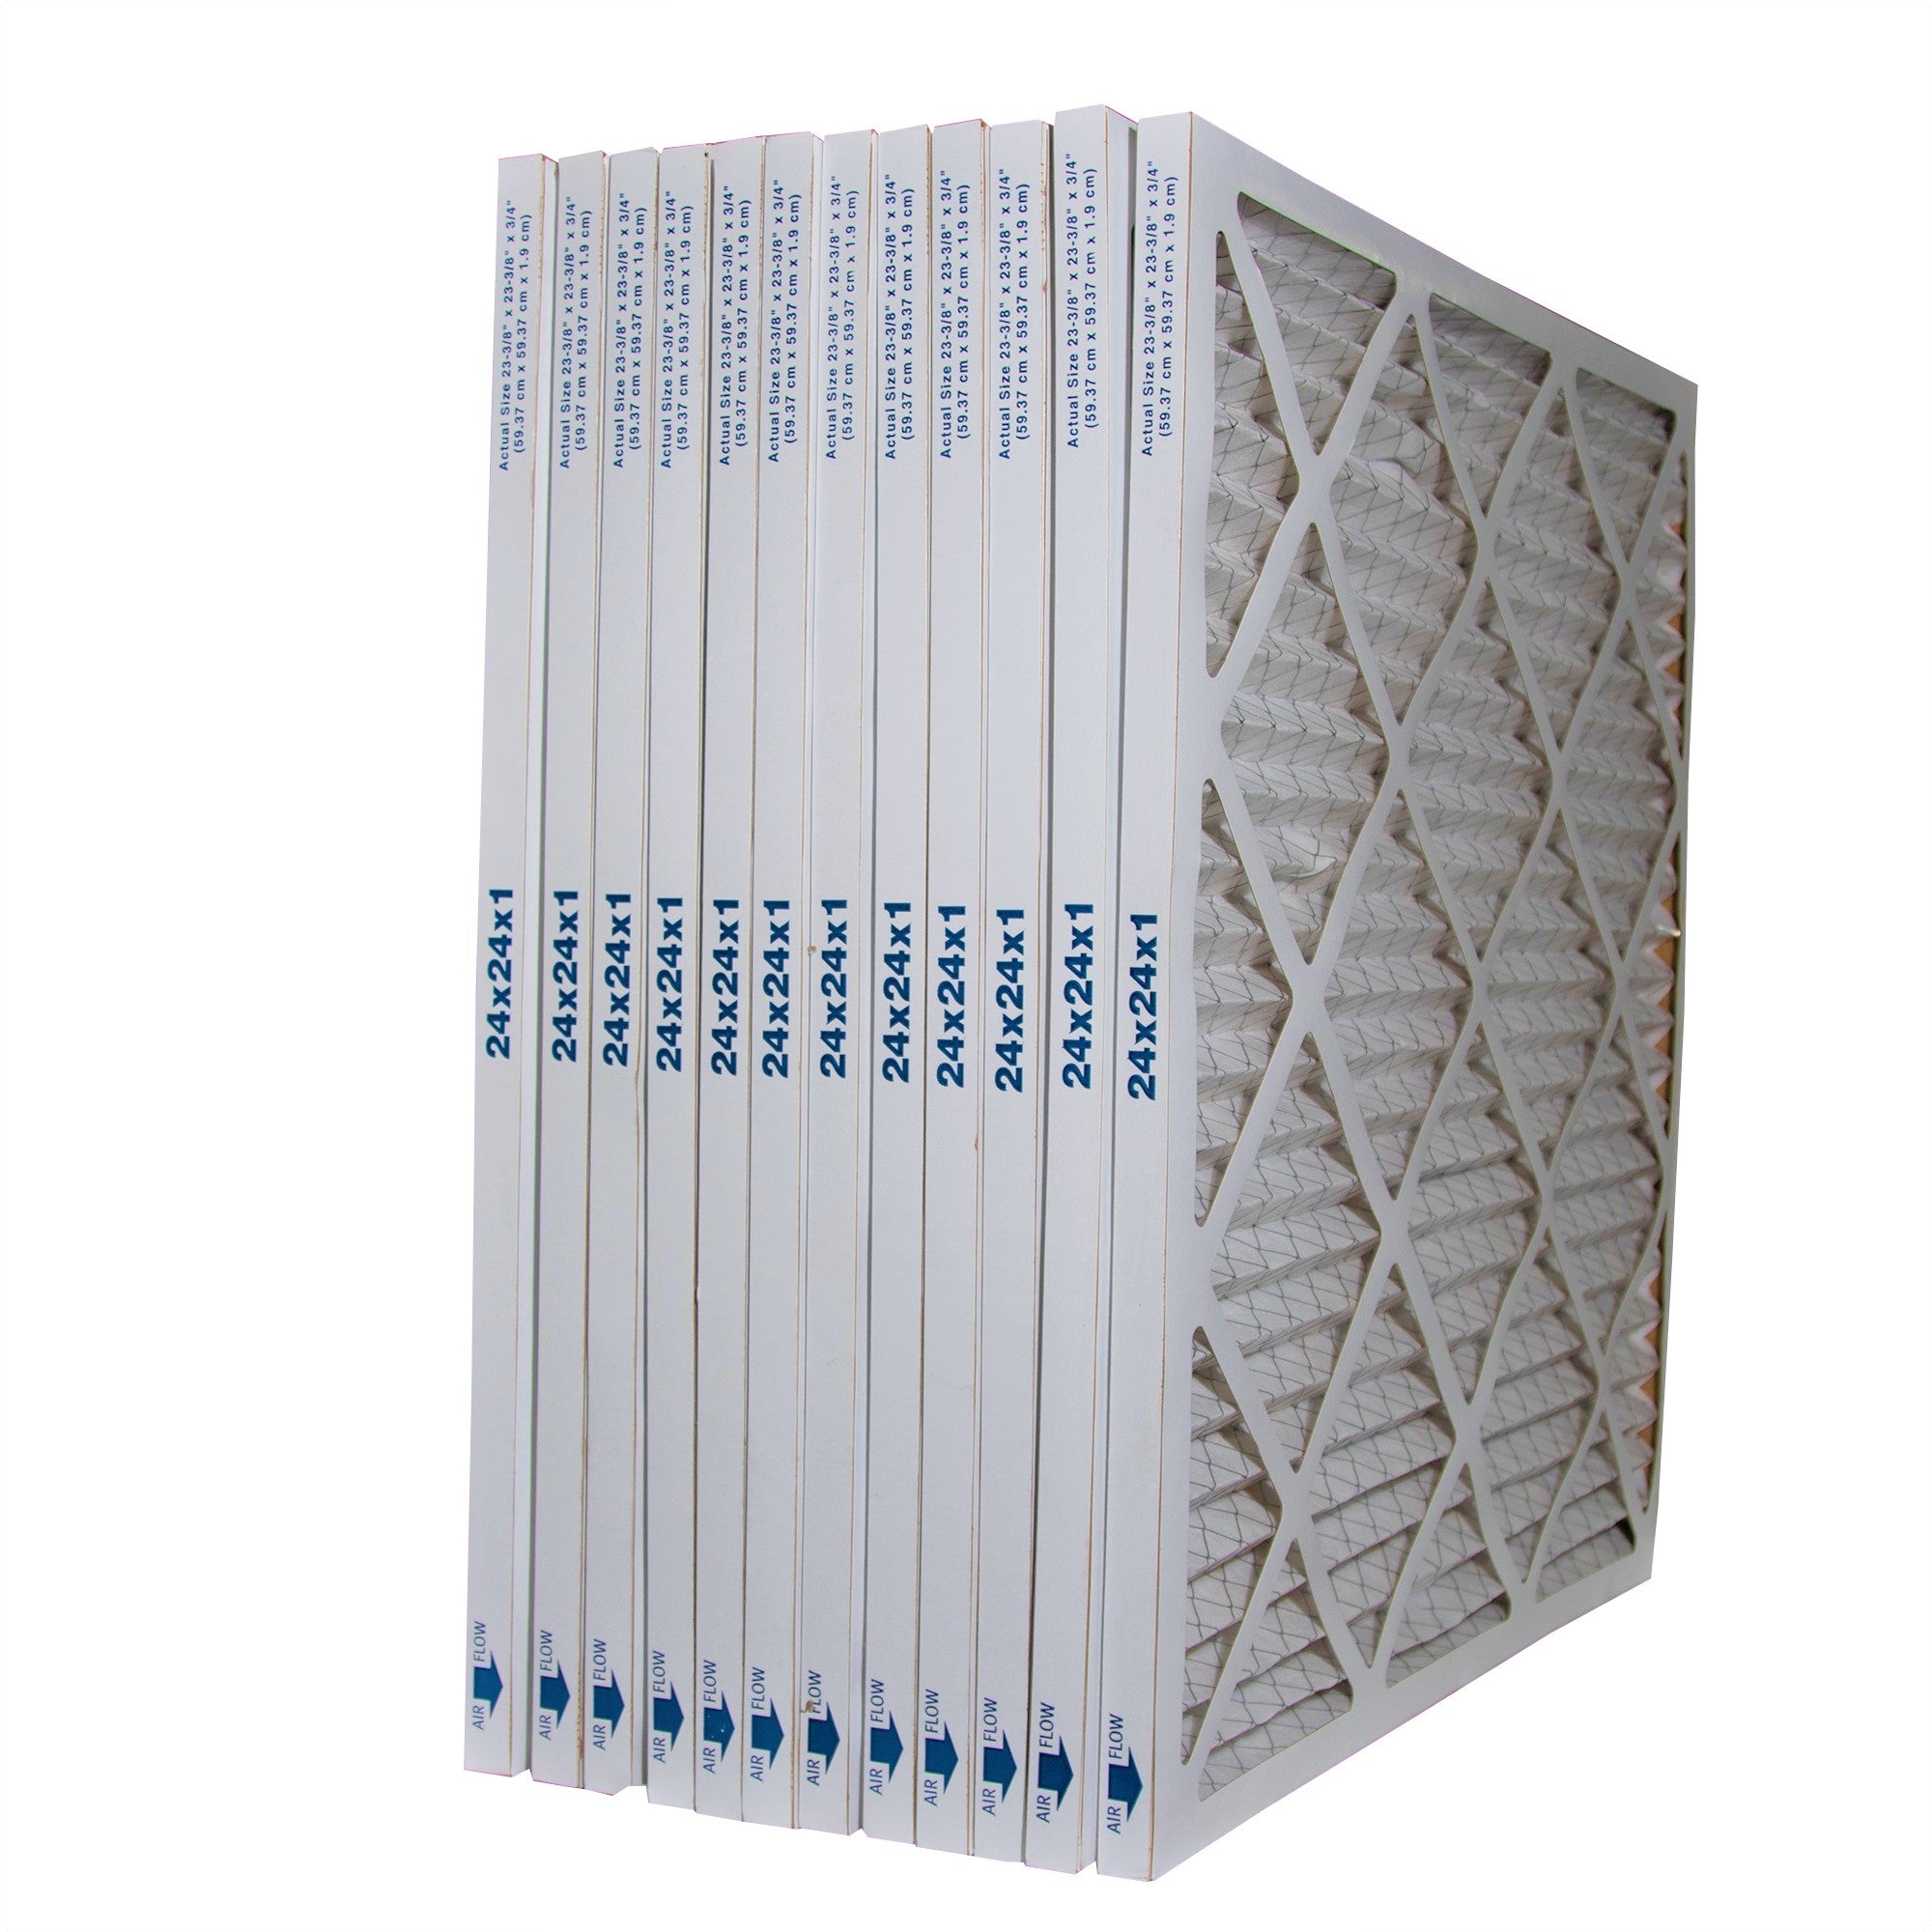 24x24x1 Furnace Filter MERV 8 Pleated Filters. Case of 12